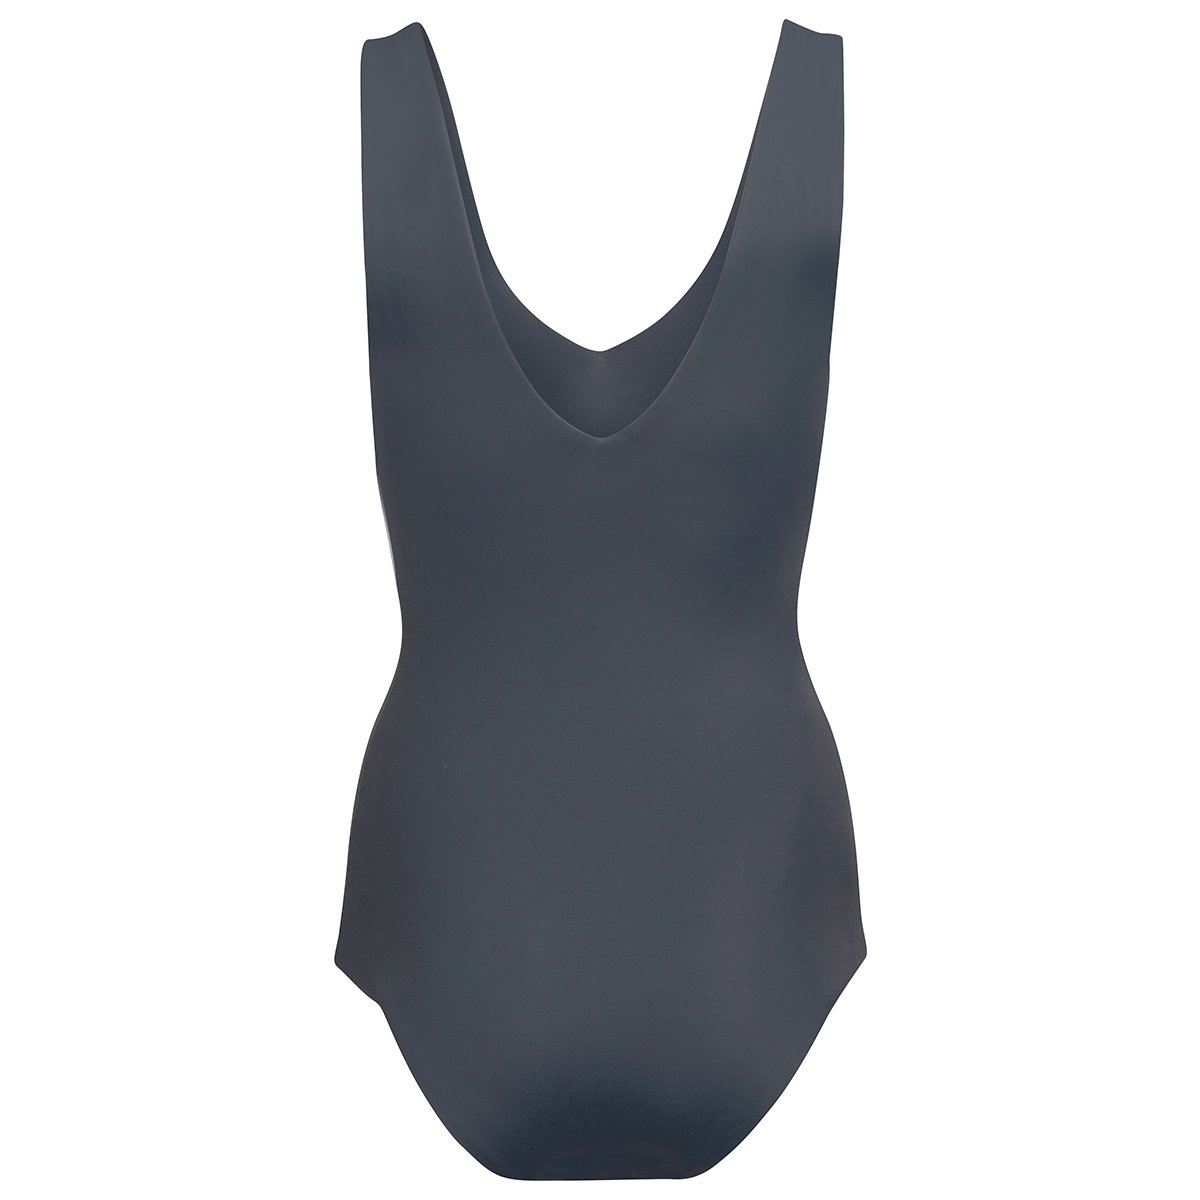 Roma Square: The Modern Square Classic One Piece